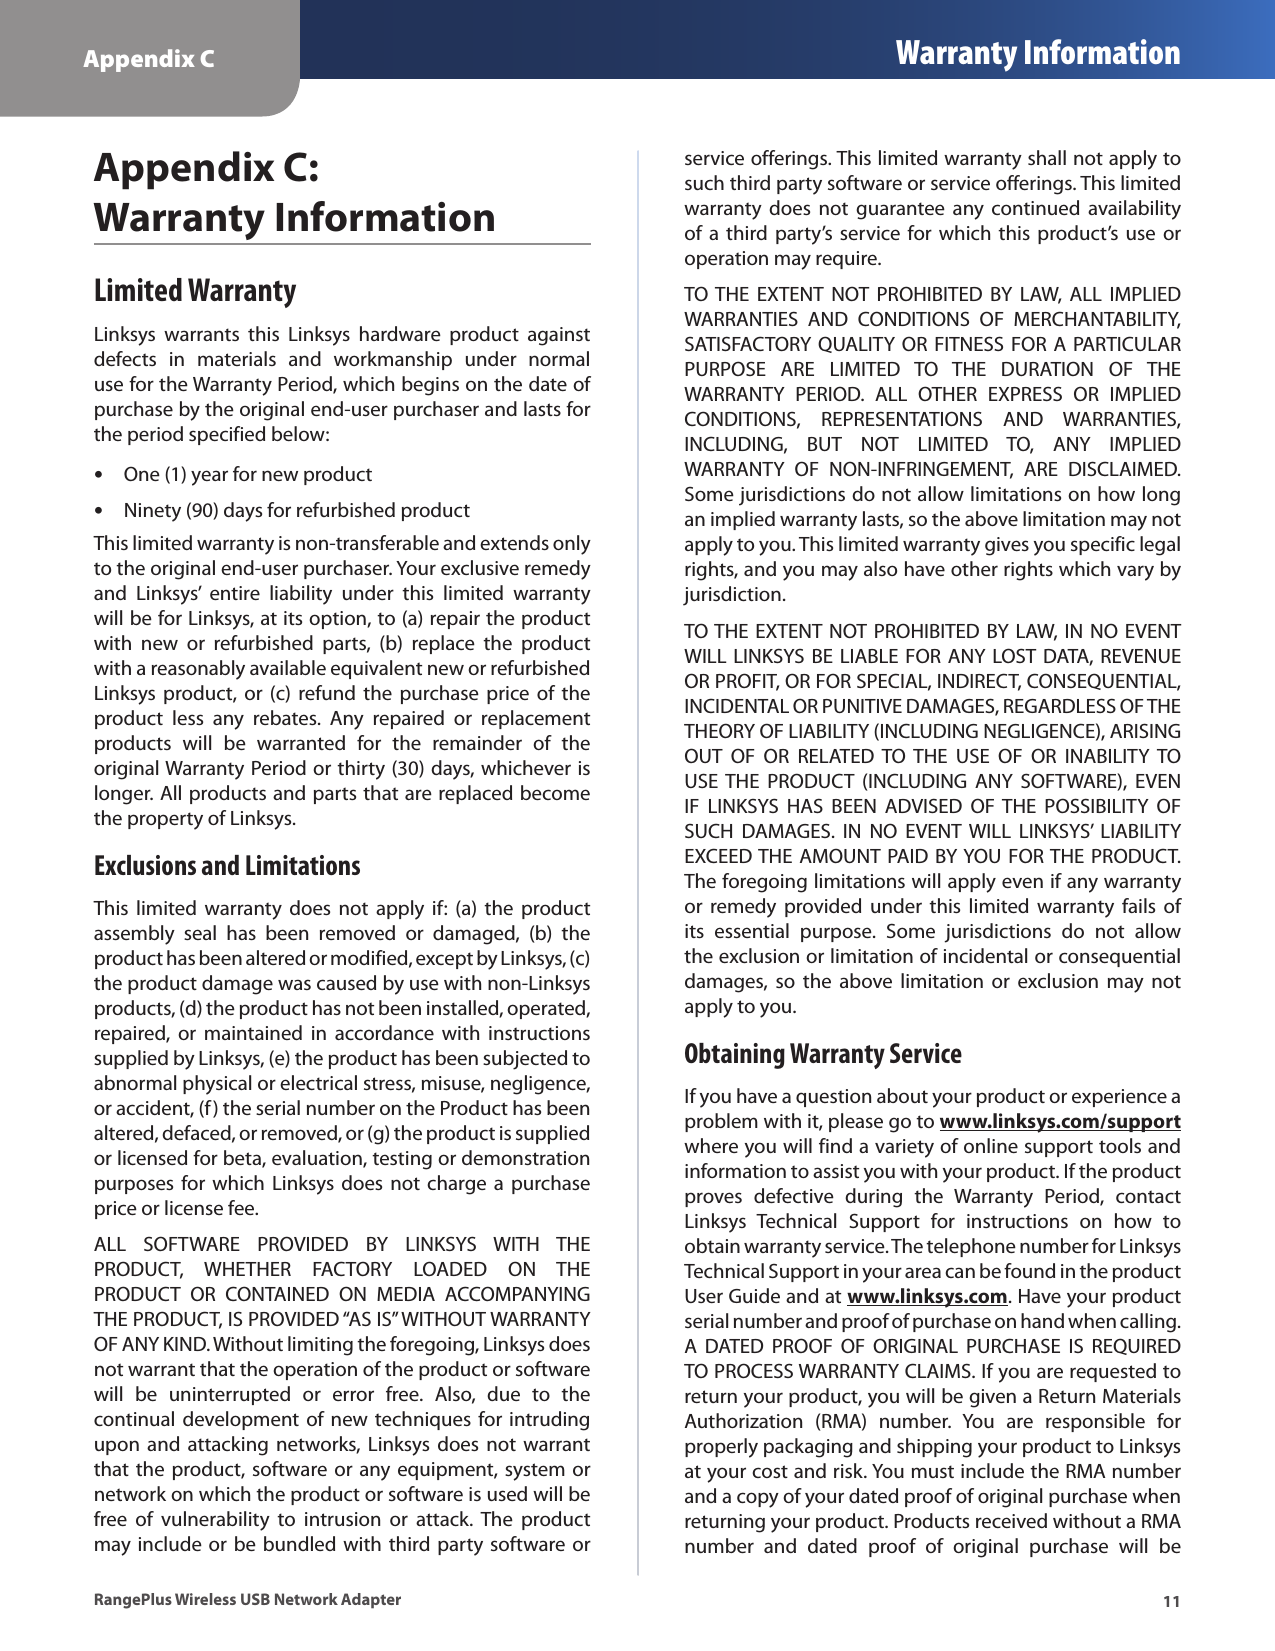 Appendix C Warranty Information11RangePlus Wireless USB Network AdapterAppendix C:  Warranty InformationLimited WarrantyLinksys  warrants  this  Linksys  hardware  product  against defects  in  materials  and  workmanship  under  normal use for the Warranty Period, which begins on the date of purchase by the original end-user purchaser and lasts for the period specified below:One (1) year for new product •Ninety (90) days for refurbished product •This limited warranty is non-transferable and extends only to the original end-user purchaser. Your exclusive remedy and  Linksys’  entire  liability  under  this  limited  warranty will be for Linksys, at its option, to (a) repair the product with  new  or  refurbished  parts,  (b)  replace  the  product with a reasonably available equivalent new or refurbished Linksys product,  or (c)  refund the  purchase price  of  the product  less  any  rebates.  Any  repaired  or  replacement products  will  be  warranted  for  the  remainder  of  the original Warranty Period or thirty (30) days, whichever is longer. All products and parts that are replaced become the property of Linksys.Exclusions and LimitationsThis  limited  warranty  does  not  apply  if:  (a) the  product assembly  seal  has  been  removed  or  damaged,  (b)  the product has been altered or modified, except by Linksys, (c) the product damage was caused by use with non-Linksys products, (d) the product has not been installed, operated, repaired,  or  maintained  in  accordance  with  instructions supplied by Linksys, (e) the product has been subjected to abnormal physical or electrical stress, misuse, negligence, or accident, (f) the serial number on the Product has been altered, defaced, or removed, or (g) the product is supplied or licensed for beta, evaluation, testing or demonstration purposes for which  Linksys does not  charge  a purchase price or license fee.ALL  SOFTWARE  PROVIDED  BY  LINKSYS  WITH  THE PRODUCT,  WHETHER  FACTORY  LOADED  ON  THE PRODUCT  OR  CONTAINED  ON  MEDIA  ACCOMPANYING THE PRODUCT, IS PROVIDED “AS IS” WITHOUT WARRANTY OF ANY KIND. Without limiting the foregoing, Linksys does not warrant that the operation of the product or software will  be  uninterrupted  or  error  free.  Also,  due  to  the continual development of new techniques for intruding upon and  attacking  networks, Linksys does  not warrant that the product, software or any equipment, system or network on which the product or software is used will be free  of  vulnerability  to  intrusion  or  attack.  The  product may include or be bundled with third party software or service offerings. This limited warranty shall not apply to such third party software or service offerings. This limited warranty  does  not  guarantee  any  continued  availability of a  third party’s  service  for  which this product’s use  or operation may require. TO THE  EXTENT  NOT  PROHIBITED  BY  LAW,  ALL  IMPLIED WARRANTIES  AND  CONDITIONS  OF  MERCHANTABILITY, SATISFACTORY QUALITY OR FITNESS FOR A  PARTICULAR PURPOSE  ARE  LIMITED  TO  THE  DURATION  OF  THE WARRANTY  PERIOD.  ALL  OTHER  EXPRESS  OR  IMPLIED CONDITIONS,  REPRESENTATIONS  AND  WARRANTIES, INCLUDING,  BUT  NOT  LIMITED  TO,  ANY  IMPLIED WARRANTY  OF  NON-INFRINGEMENT,  ARE  DISCLAIMED. Some jurisdictions do not allow limitations on how long an implied warranty lasts, so the above limitation may not apply to you. This limited warranty gives you specific legal rights, and you may also have other rights which vary by jurisdiction.TO THE  EXTENT NOT PROHIBITED BY LAW, IN NO EVENT WILL LINKSYS BE LIABLE FOR ANY LOST DATA, REVENUE OR PROFIT, OR FOR SPECIAL, INDIRECT, CONSEQUENTIAL, INCIDENTAL OR PUNITIVE DAMAGES, REGARDLESS OF THE THEORY OF LIABILITY (INCLUDING NEGLIGENCE), ARISING OUT  OF  OR  RELATED  TO  THE  USE  OF  OR  INABILITY  TO USE THE  PRODUCT  (INCLUDING  ANY  SOFTWARE),  EVEN IF  LINKSYS  HAS  BEEN  ADVISED  OF THE  POSSIBILITY  OF SUCH  DAMAGES.  IN  NO  EVENT WILL  LINKSYS’  LIABILITY EXCEED THE  AMOUNT PAID  BY YOU FOR THE PRODUCT. The foregoing limitations will apply even if any warranty or  remedy provided  under  this  limited  warranty  fails of its  essential  purpose.  Some  jurisdictions  do  not  allow the exclusion or limitation of incidental or consequential damages,  so  the  above  limitation  or  exclusion  may  not apply to you.Obtaining Warranty ServiceIf you have a question about your product or experience a problem with it, please go to www.linksys.com/support where you will find a variety of online support tools and information to assist you with your product. If the product proves  defective  during  the  Warranty  Period,  contact Linksys  Technical  Support  for  instructions  on  how  to obtain warranty service. The telephone number for Linksys Technical Support in your area can be found in the product User Guide and at www.linksys.com. Have your product serial number and proof of purchase on hand when calling. A  DATED  PROOF  OF  ORIGINAL  PURCHASE  IS  REQUIRED TO PROCESS WARRANTY CLAIMS. If you are requested to return your product, you will be given a Return Materials Authorization  (RMA)  number.  You  are  responsible  for properly packaging and shipping your product to Linksys at your cost and risk. You must include the RMA number and a copy of your dated proof of original purchase when returning your product. Products received without a RMA number  and  dated  proof  of  original  purchase  will  be 